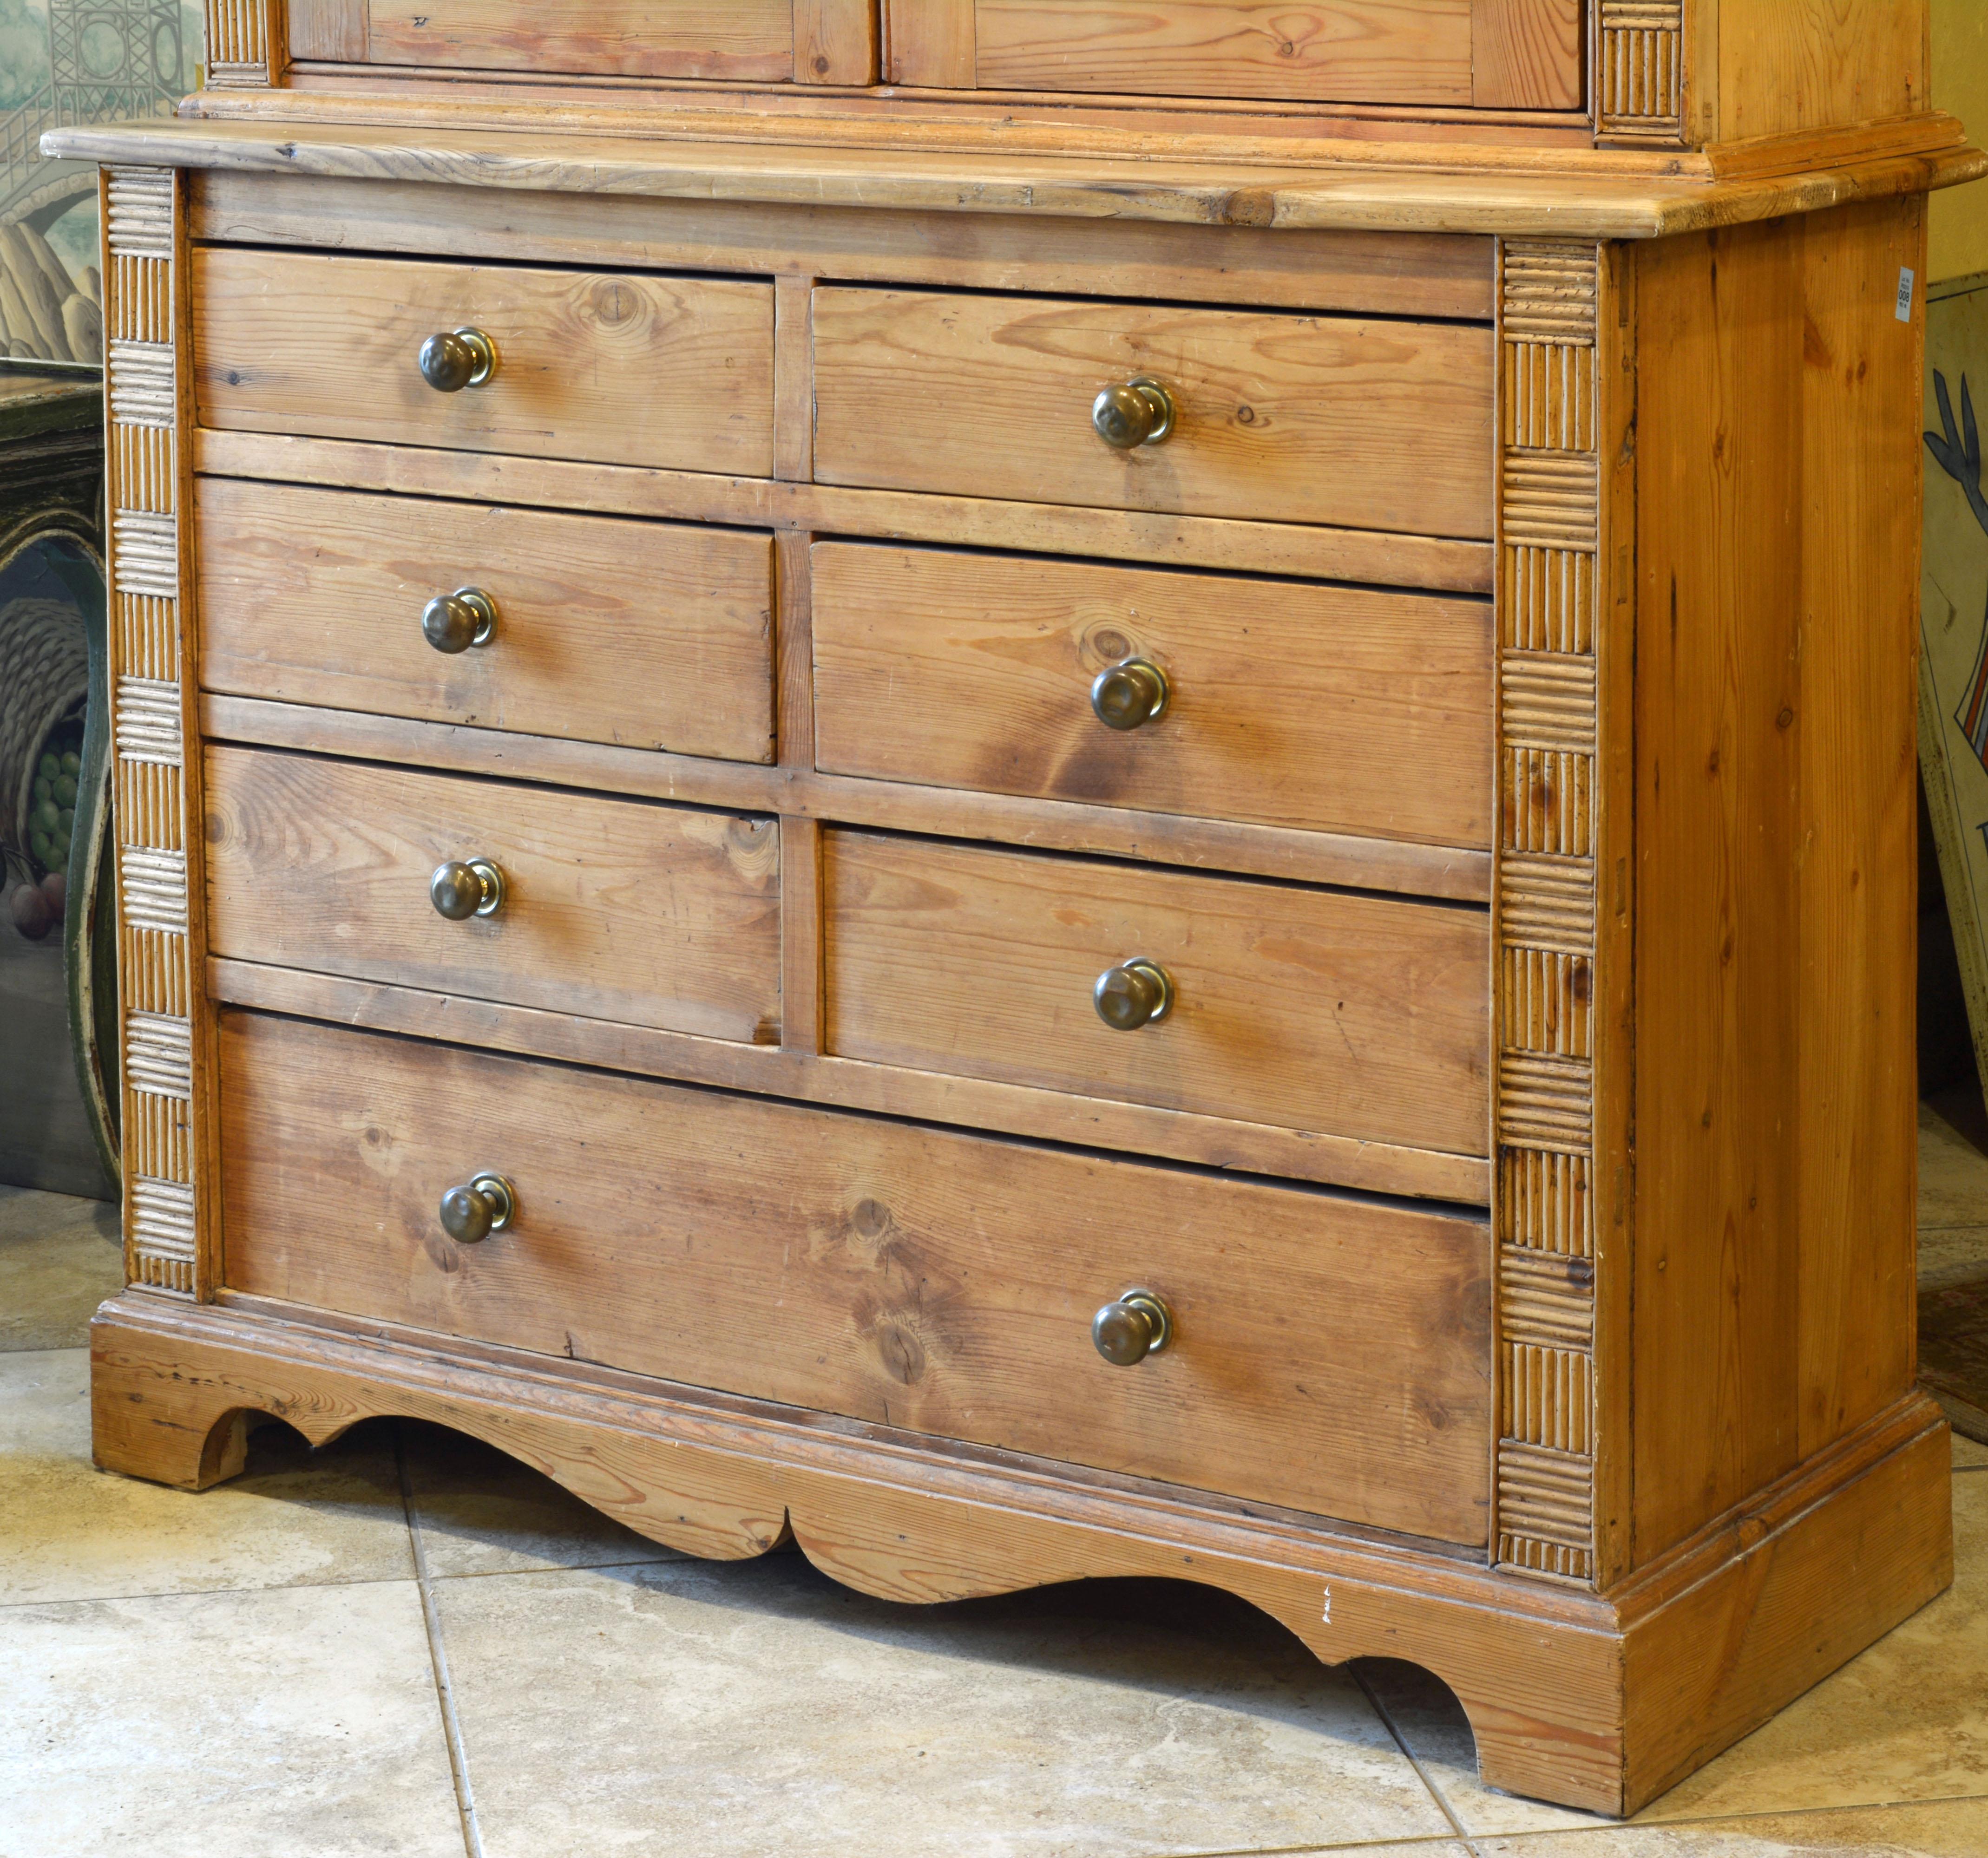 This 19th century English two-part pine step back cupboard or buffet features an upper part with Georgian style glazed doors opening up to a shelved interior and flanked by panels of matchstick moulding mosaic. The bottom part features a unusual